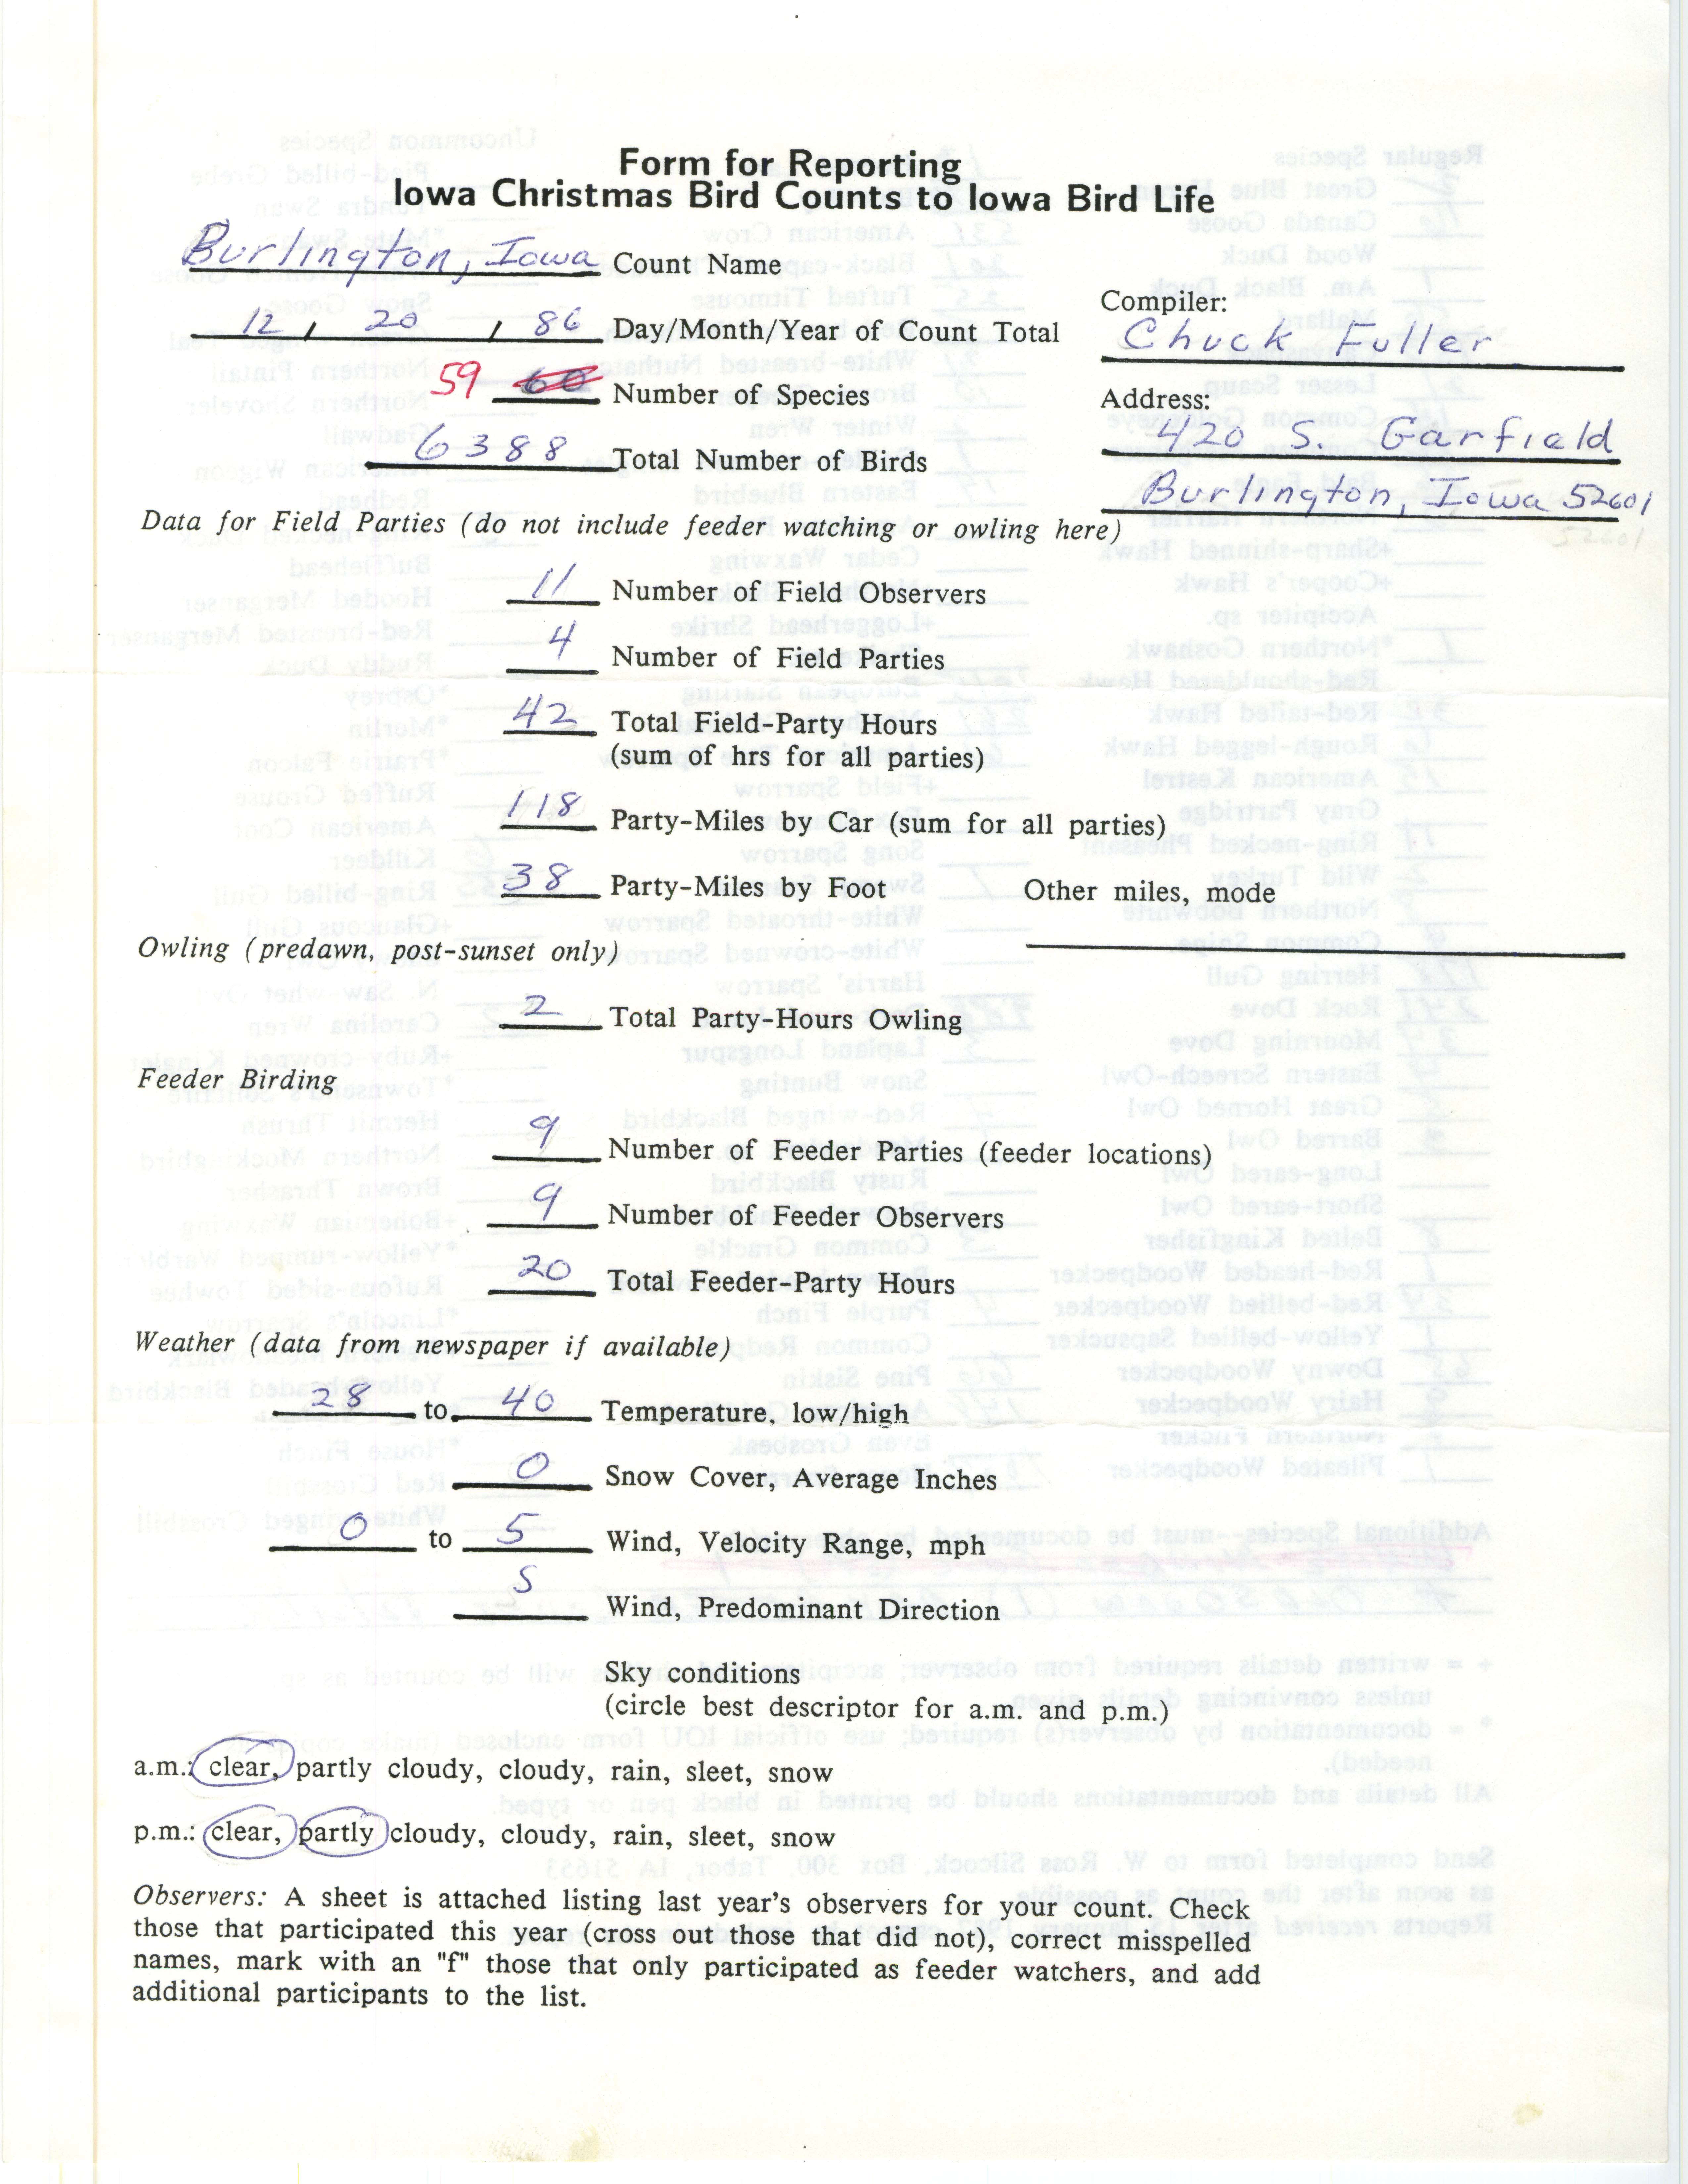 Form for reporting Iowa Christmas bird counts to Iowa Bird Life, Charles Fuller, December 20, 1986